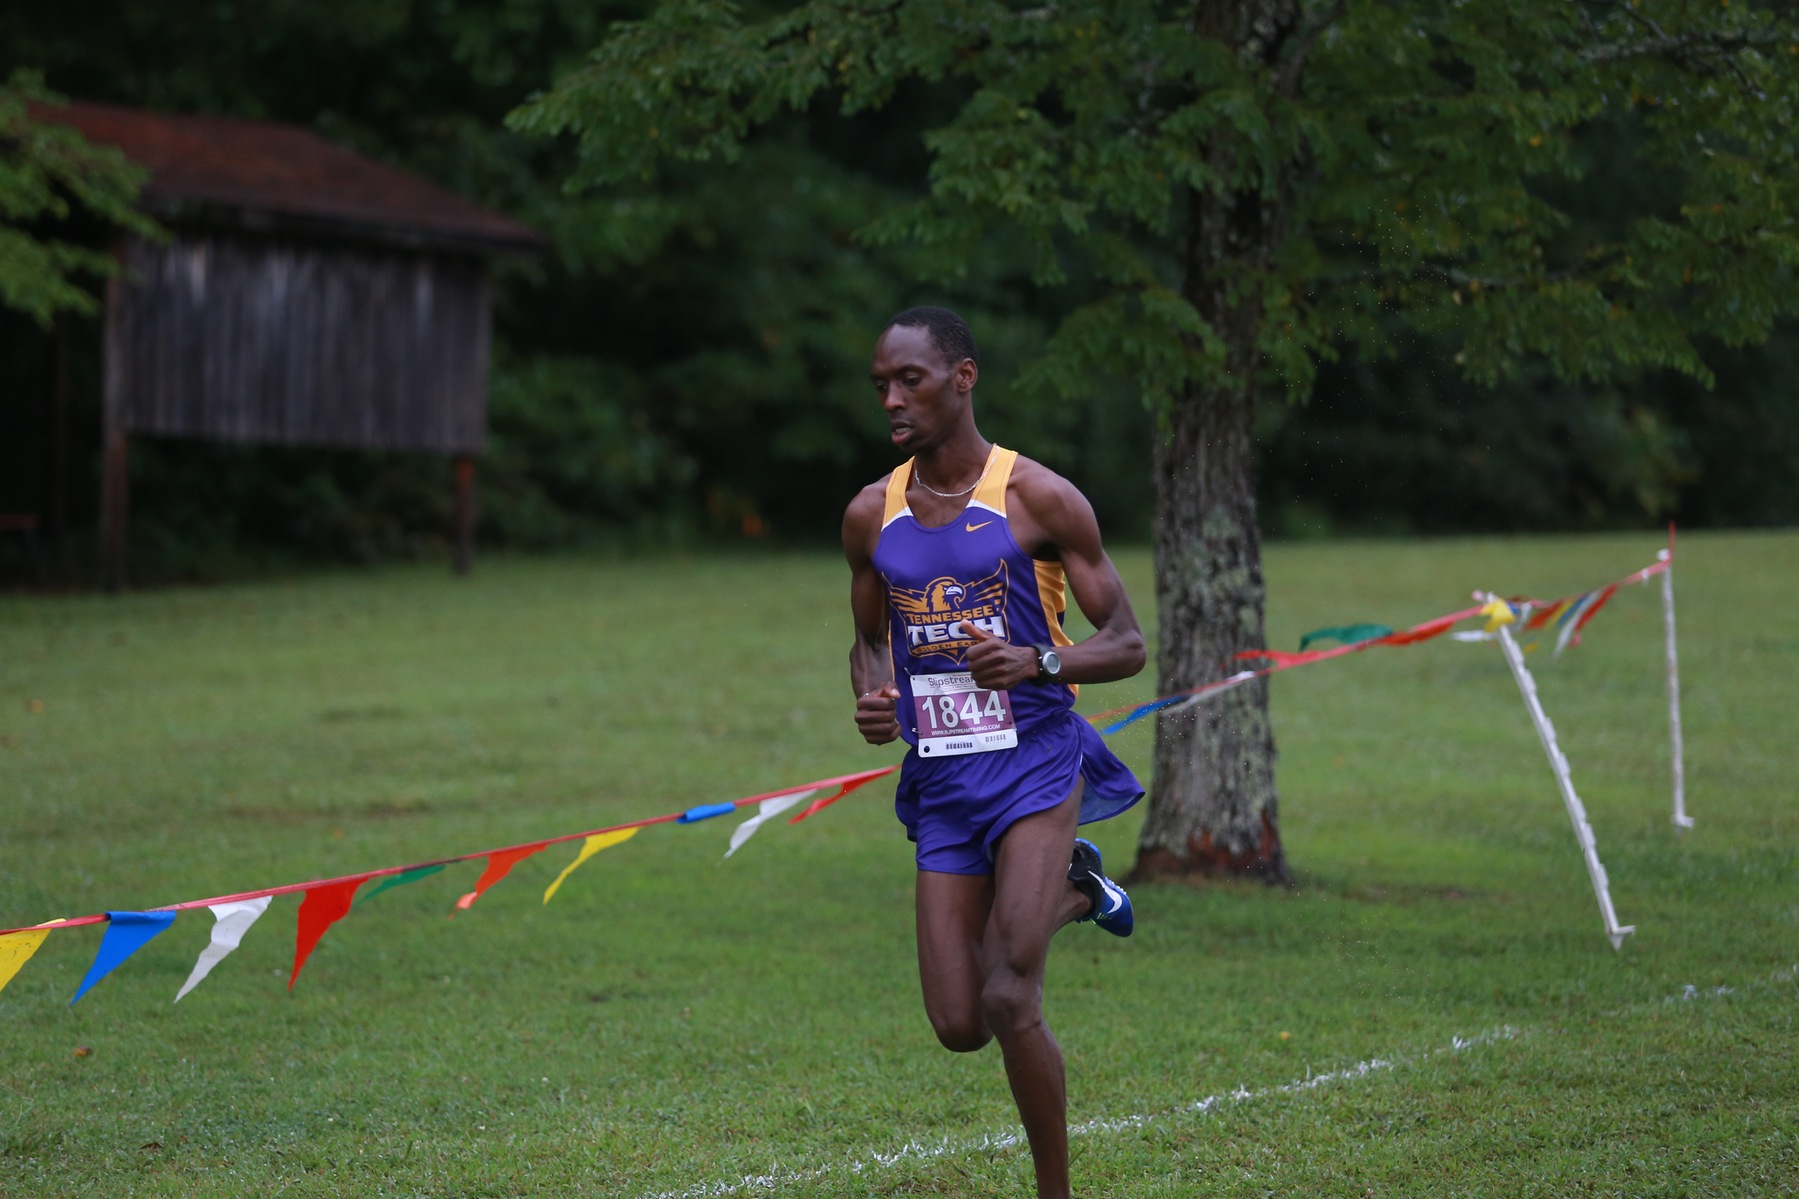 Boit earns second OVC Male Runner of the Week honor of 2017